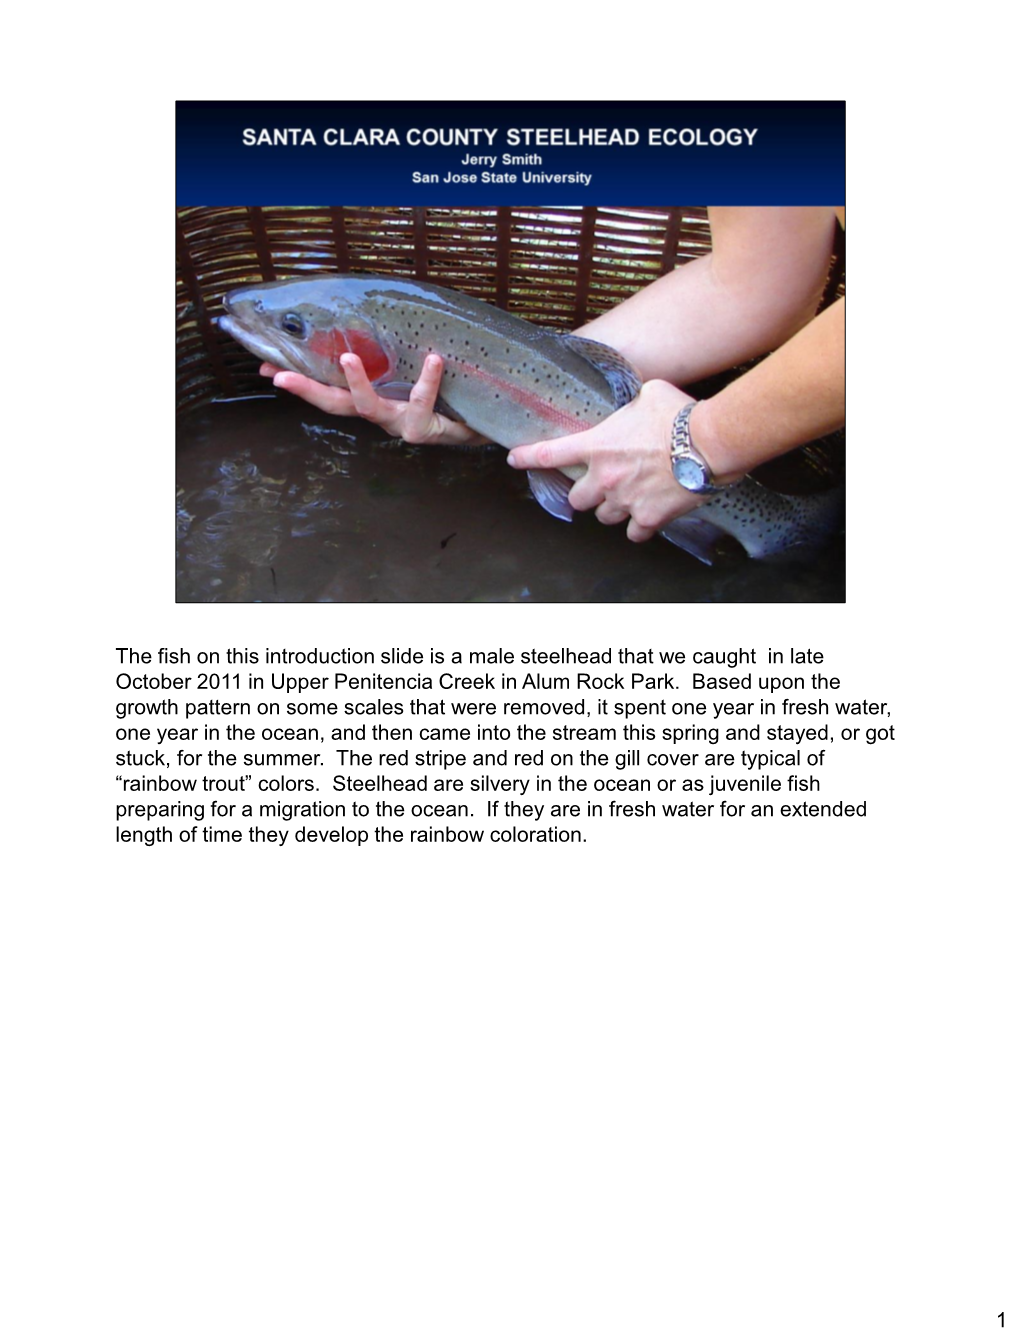 The Fish on This Introduction Slide Is a Male Steelhead That We Caught in Late October 2011 in Upper Penitencia Creek in Alum Rock Park